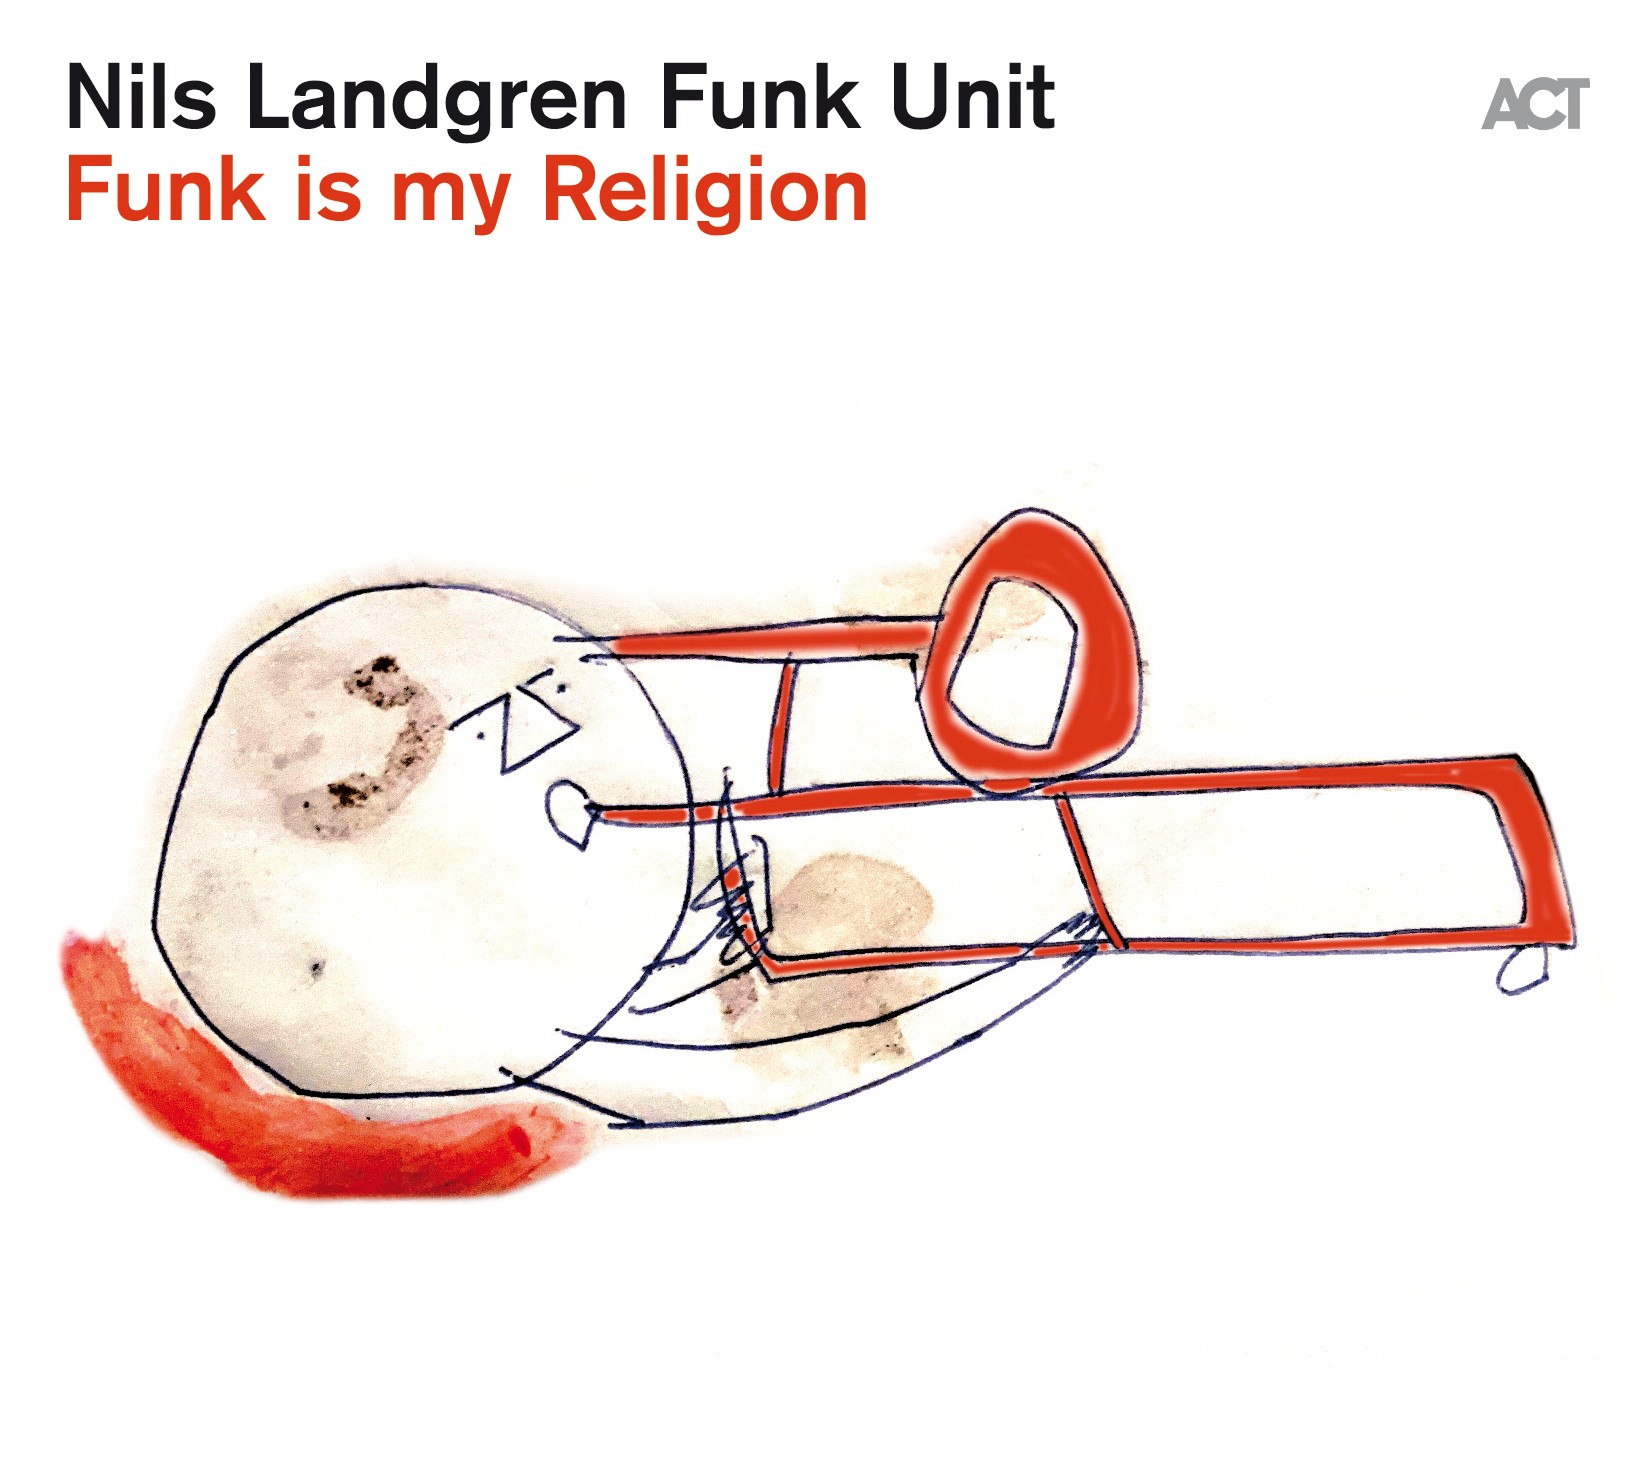 Funk is my Religion